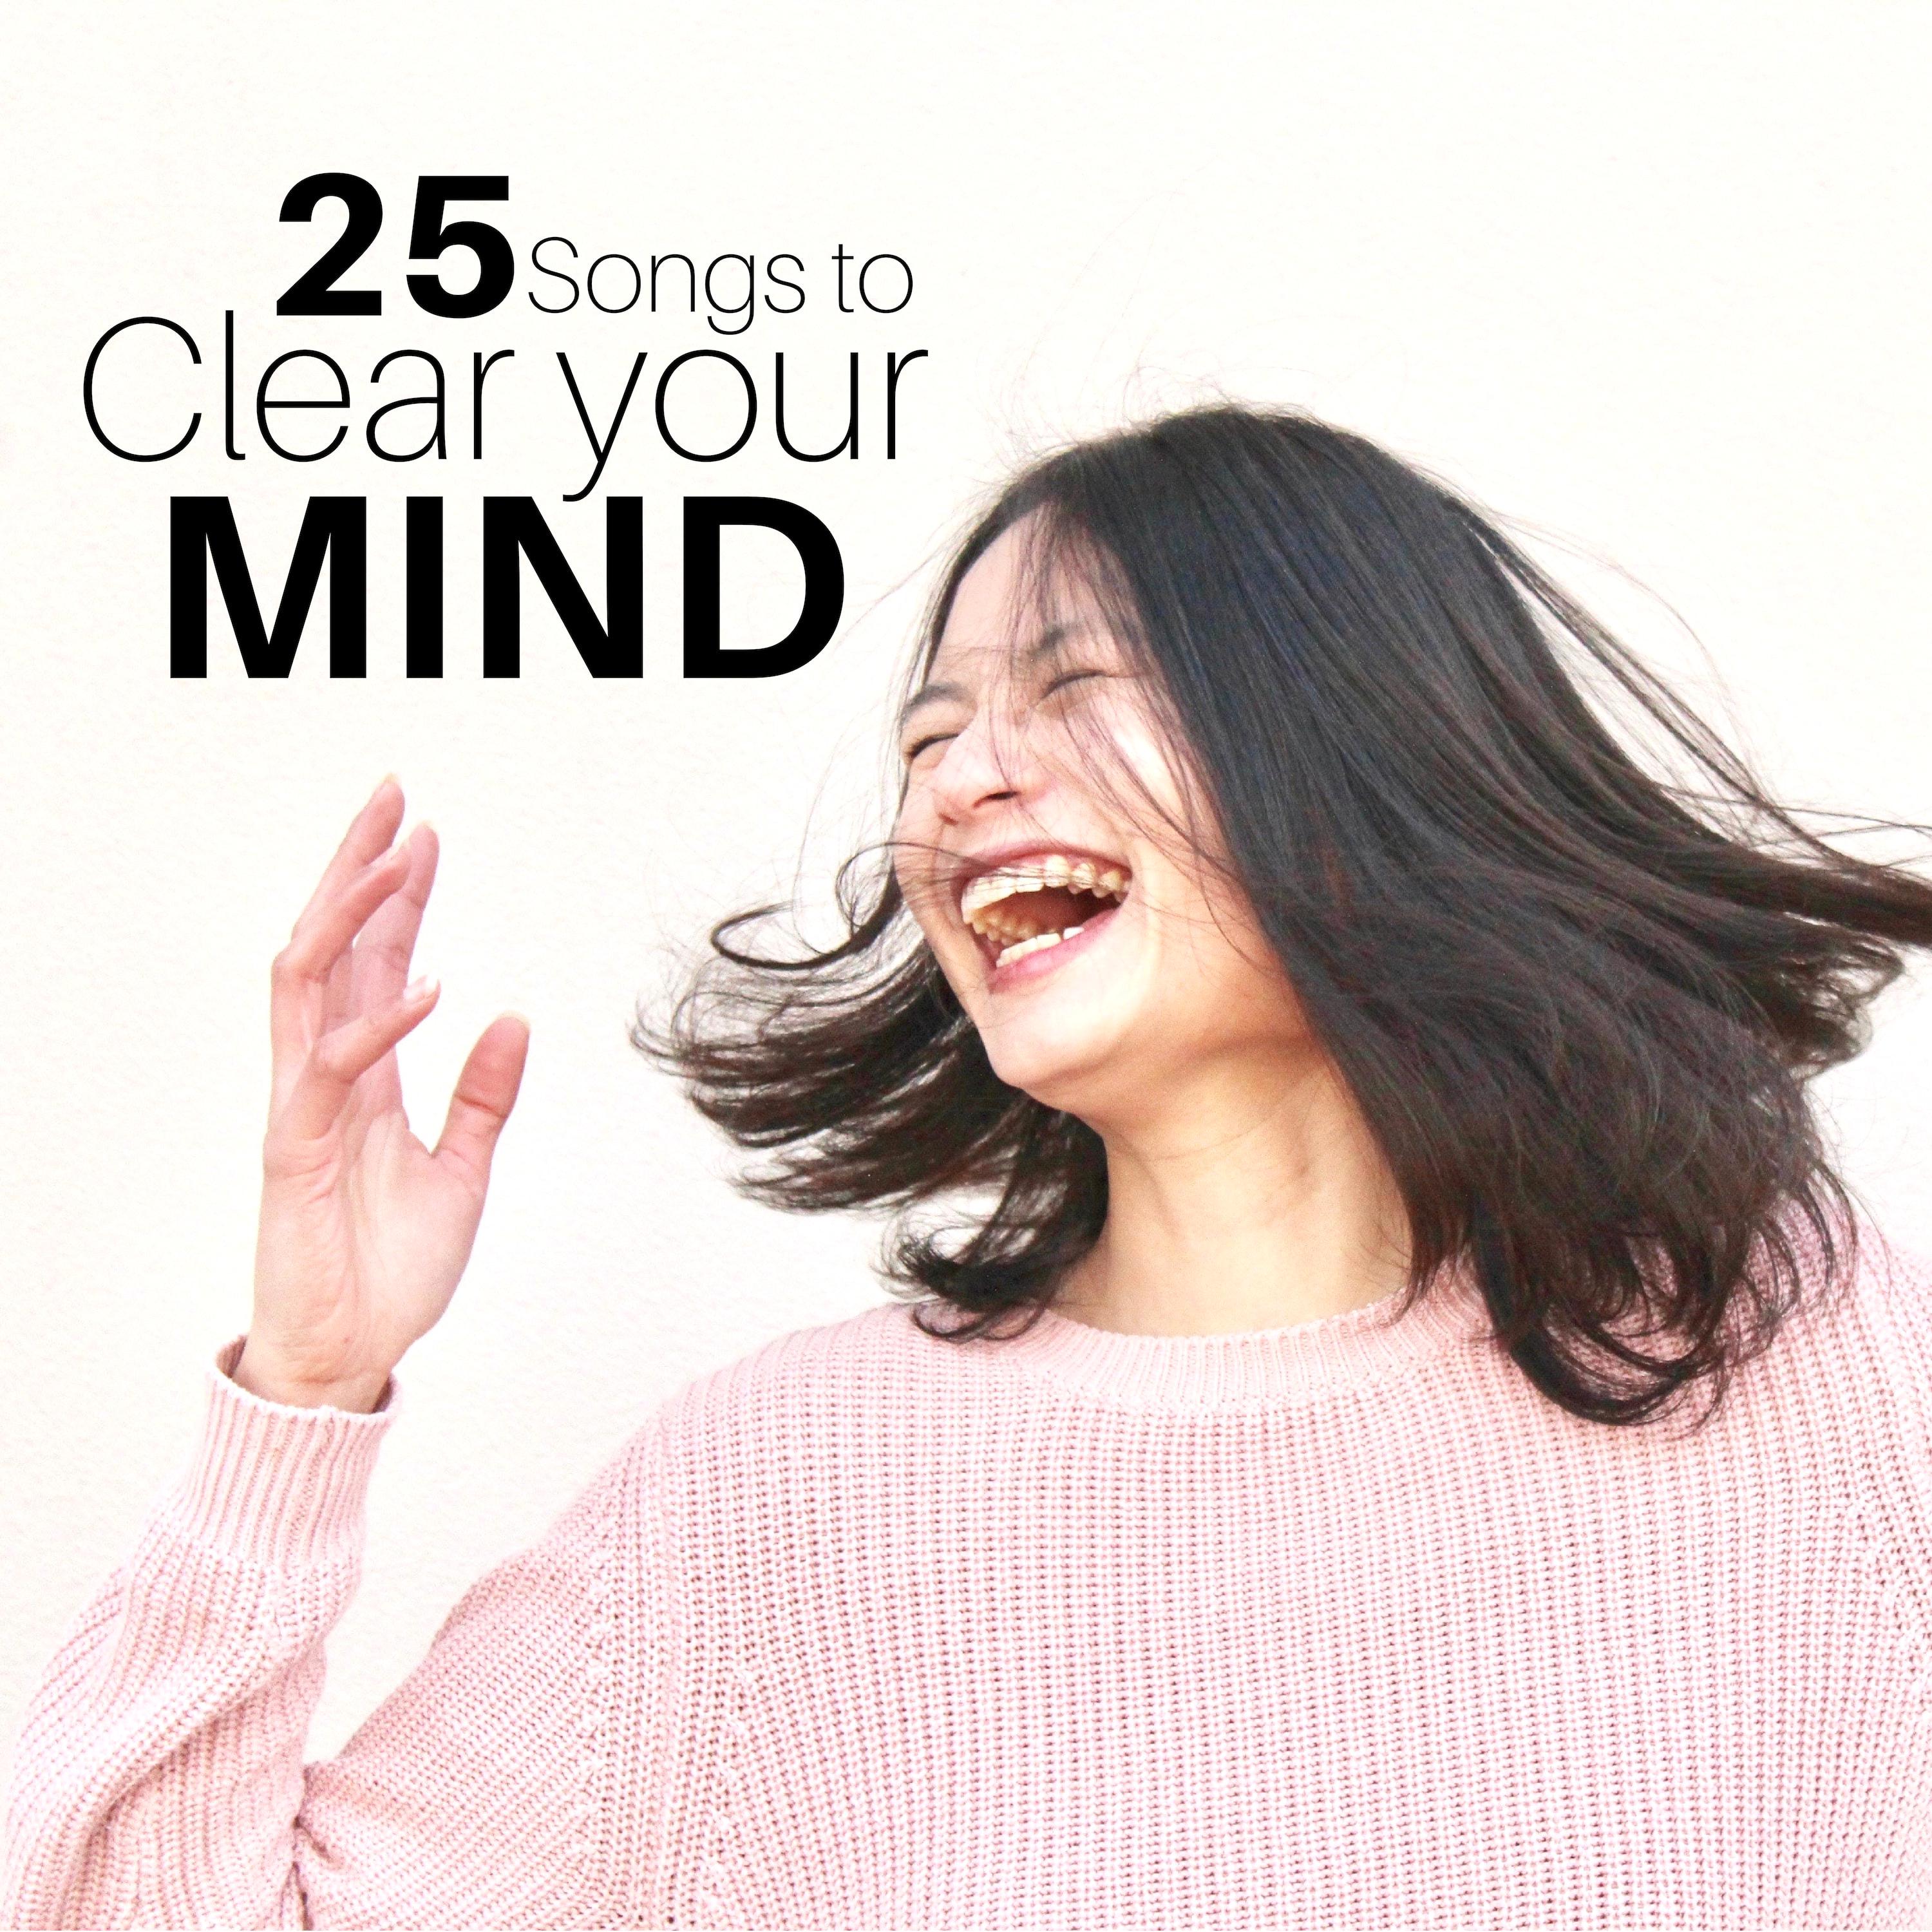 25 Songs to Clear your Mind